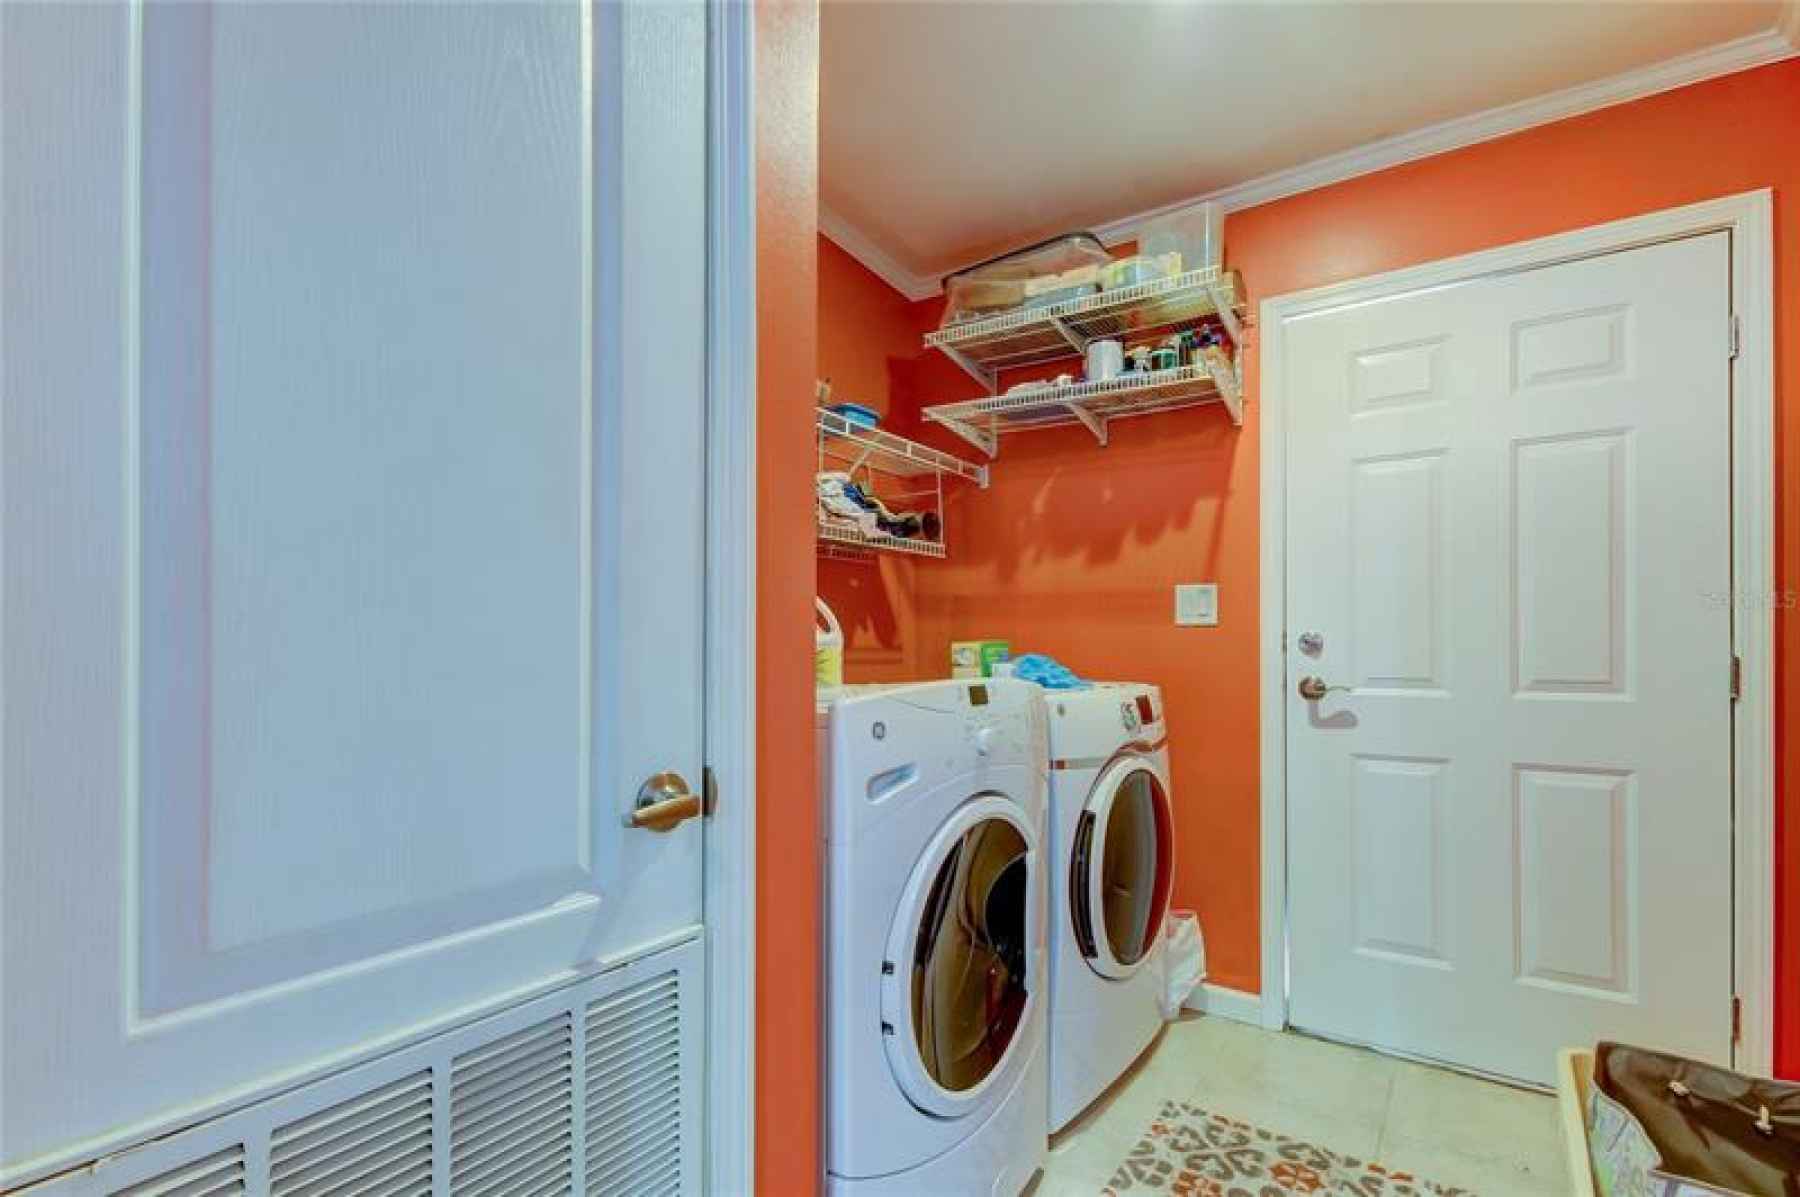 VERY SPACIOUS LAUNDRY ROOM WITH ACCESS TO THE SIDE OF THE HOME!